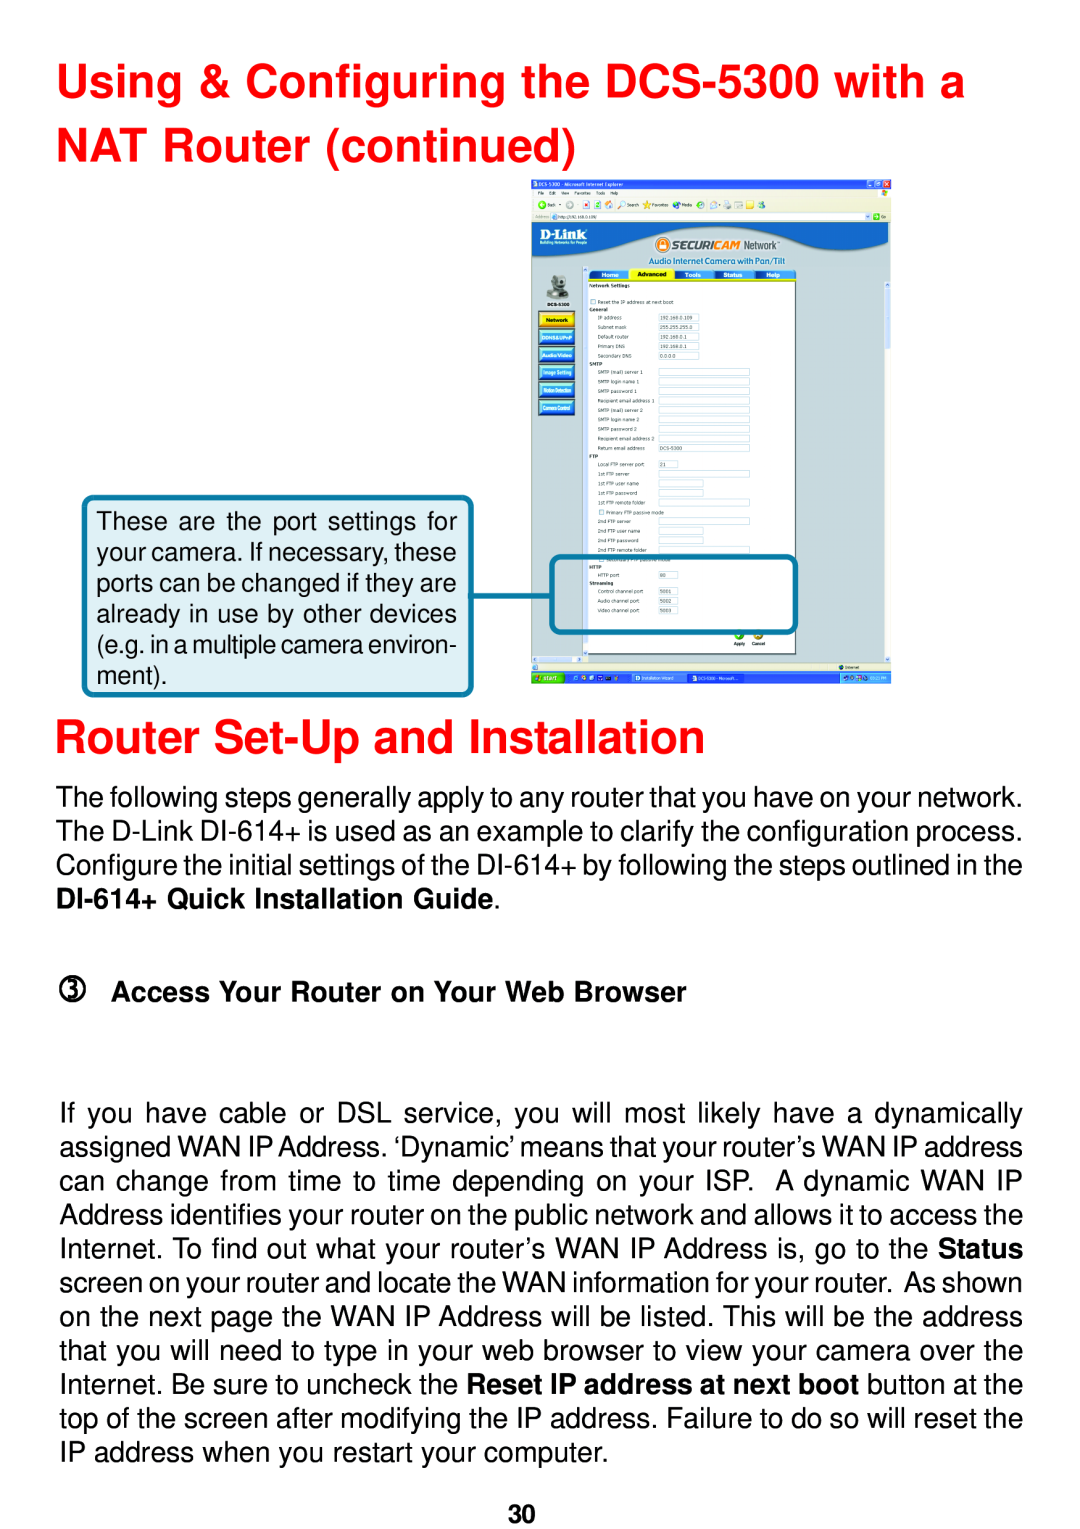 D-Link manual Router Set-Up and Installation, Using & Configuring the DCS-5300 with a NAT Router continued 